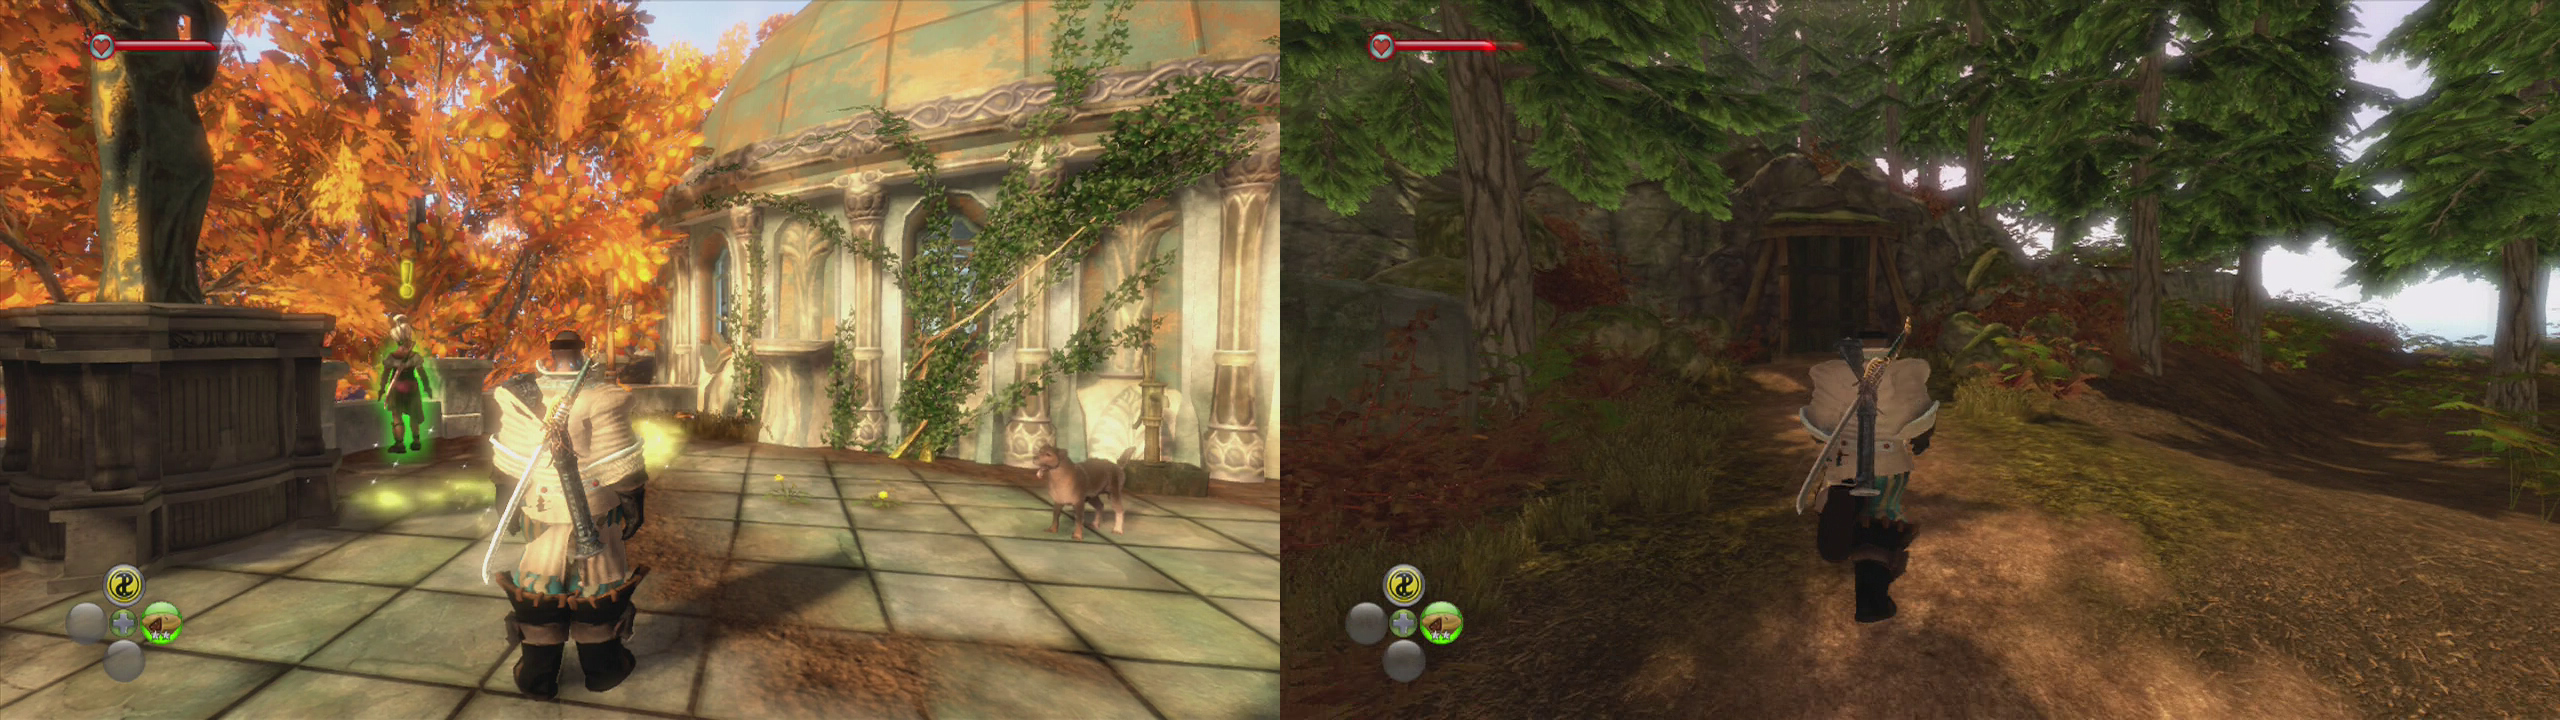 This quest is started by Tommy near the Temple of Light (left). Enter the Echo Cave (right) to begin.